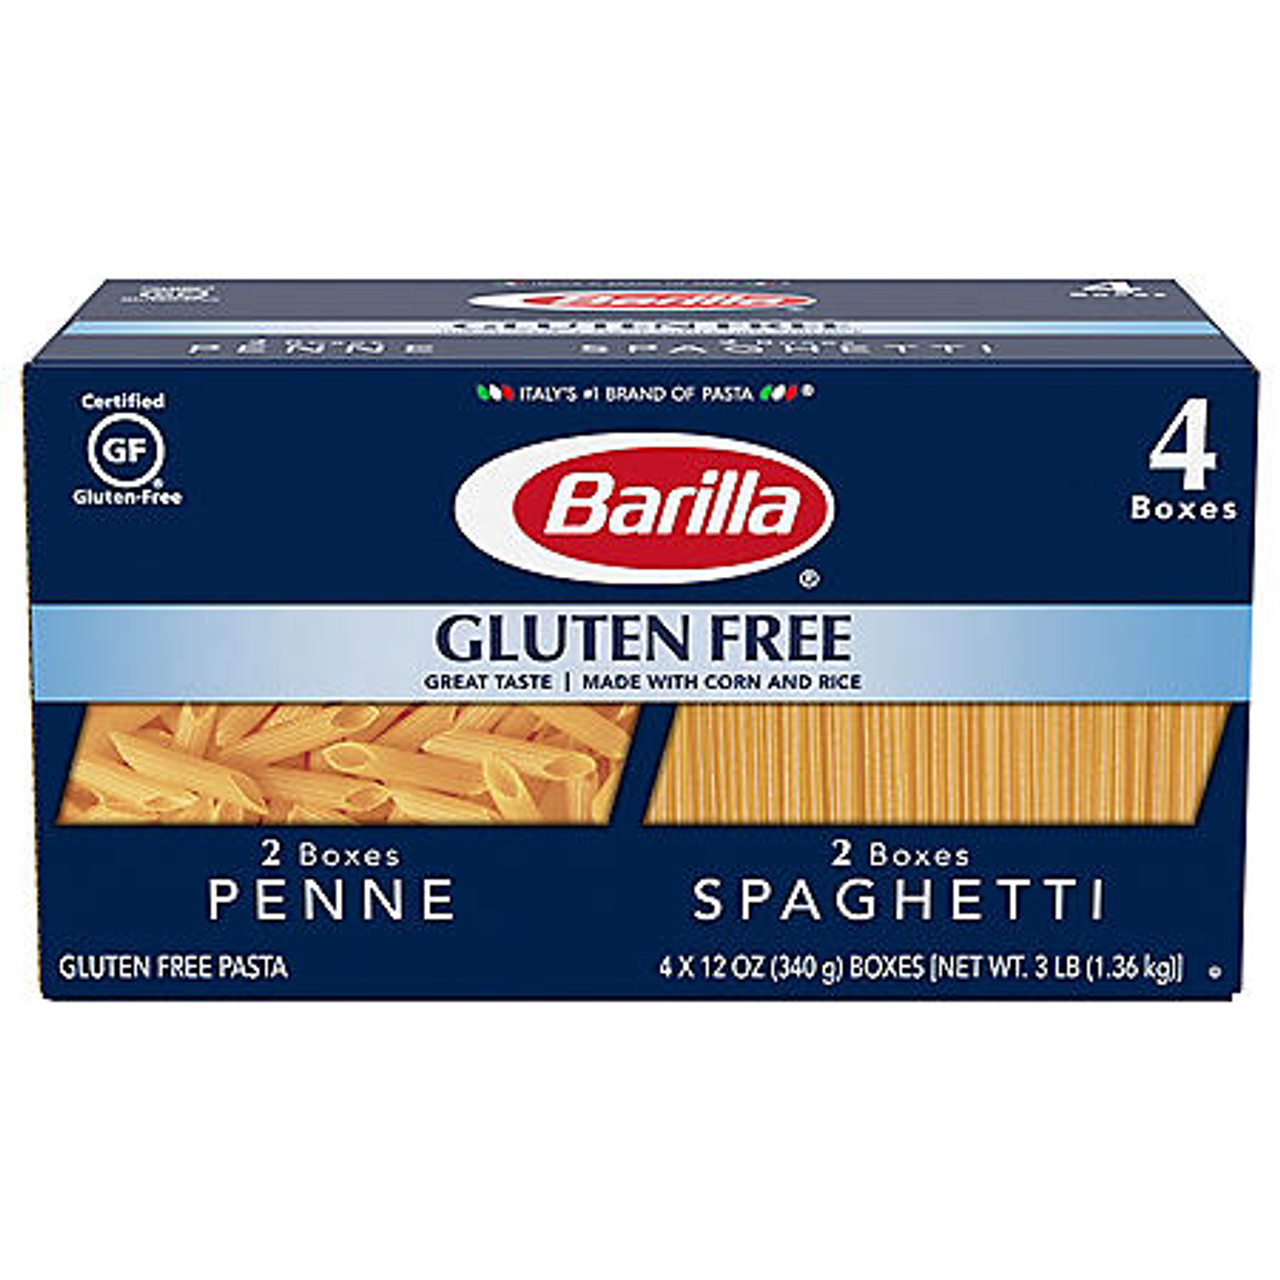 Barilla Gluten-Free Pasta, Variety Pack (12 oz., 4 pk.) - [From 49.00 - Choose pk Qty ] - *Ships from Miami